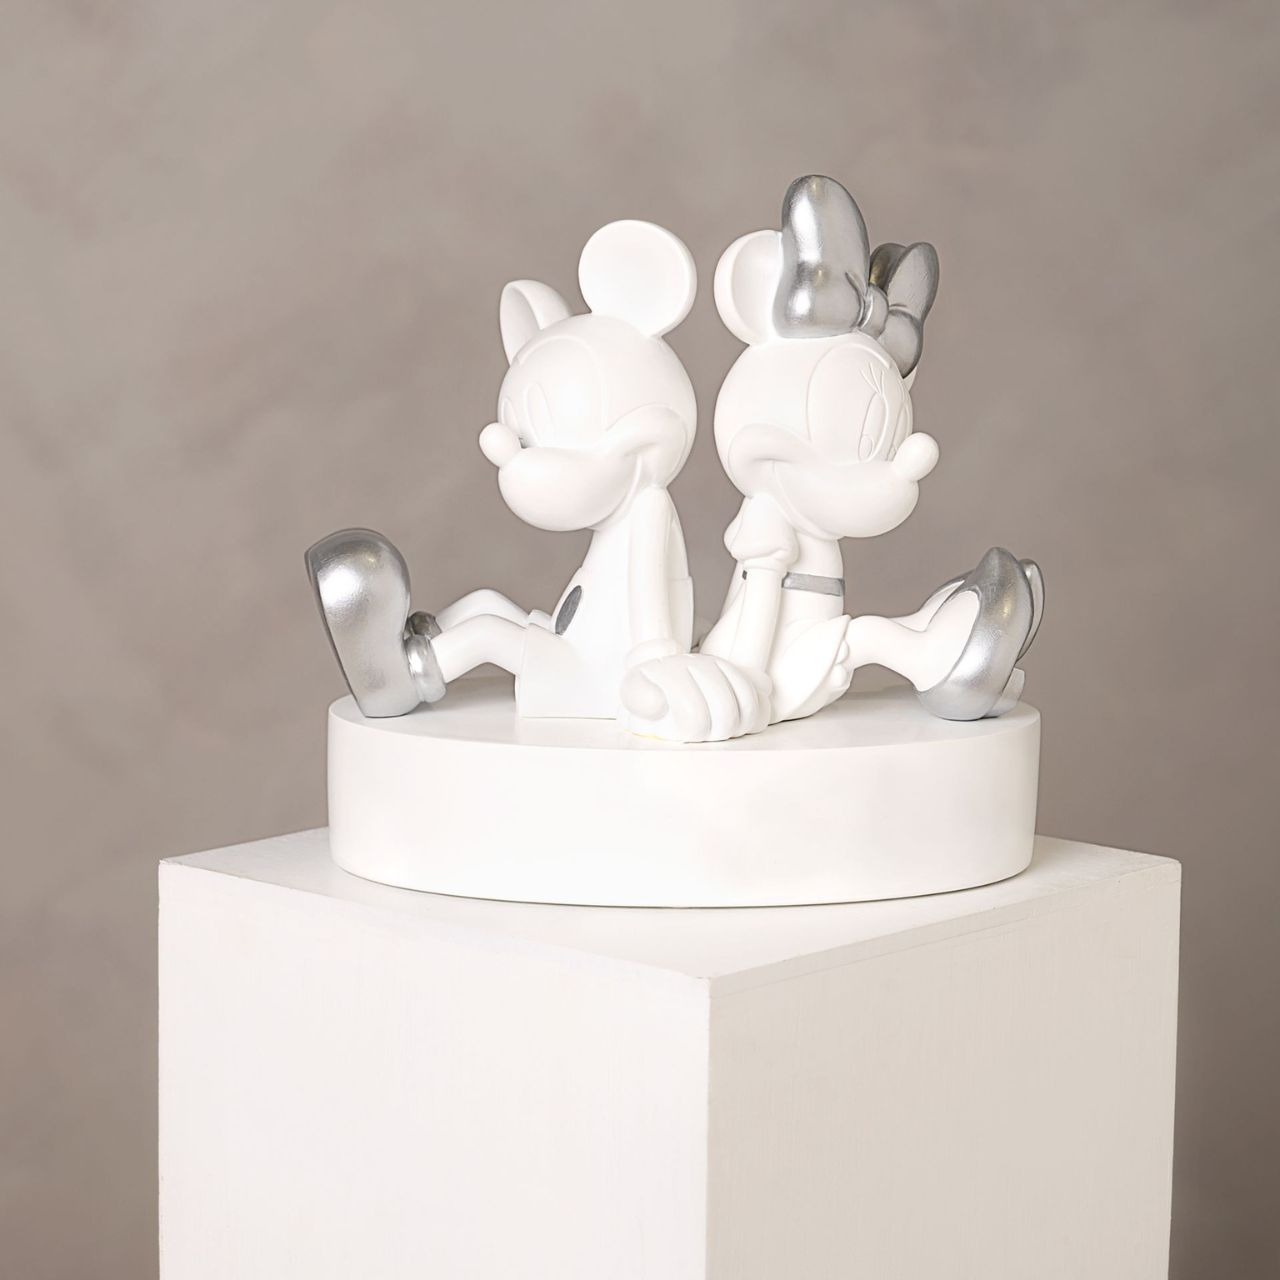 This substantial money box features the iconic pair holding hands back-to-back. This resin sculpture is a contemporary styled, statement figurine. The money slot is located at the back, with an easy-to-remove rubber plug on its base for retrieval of funds.